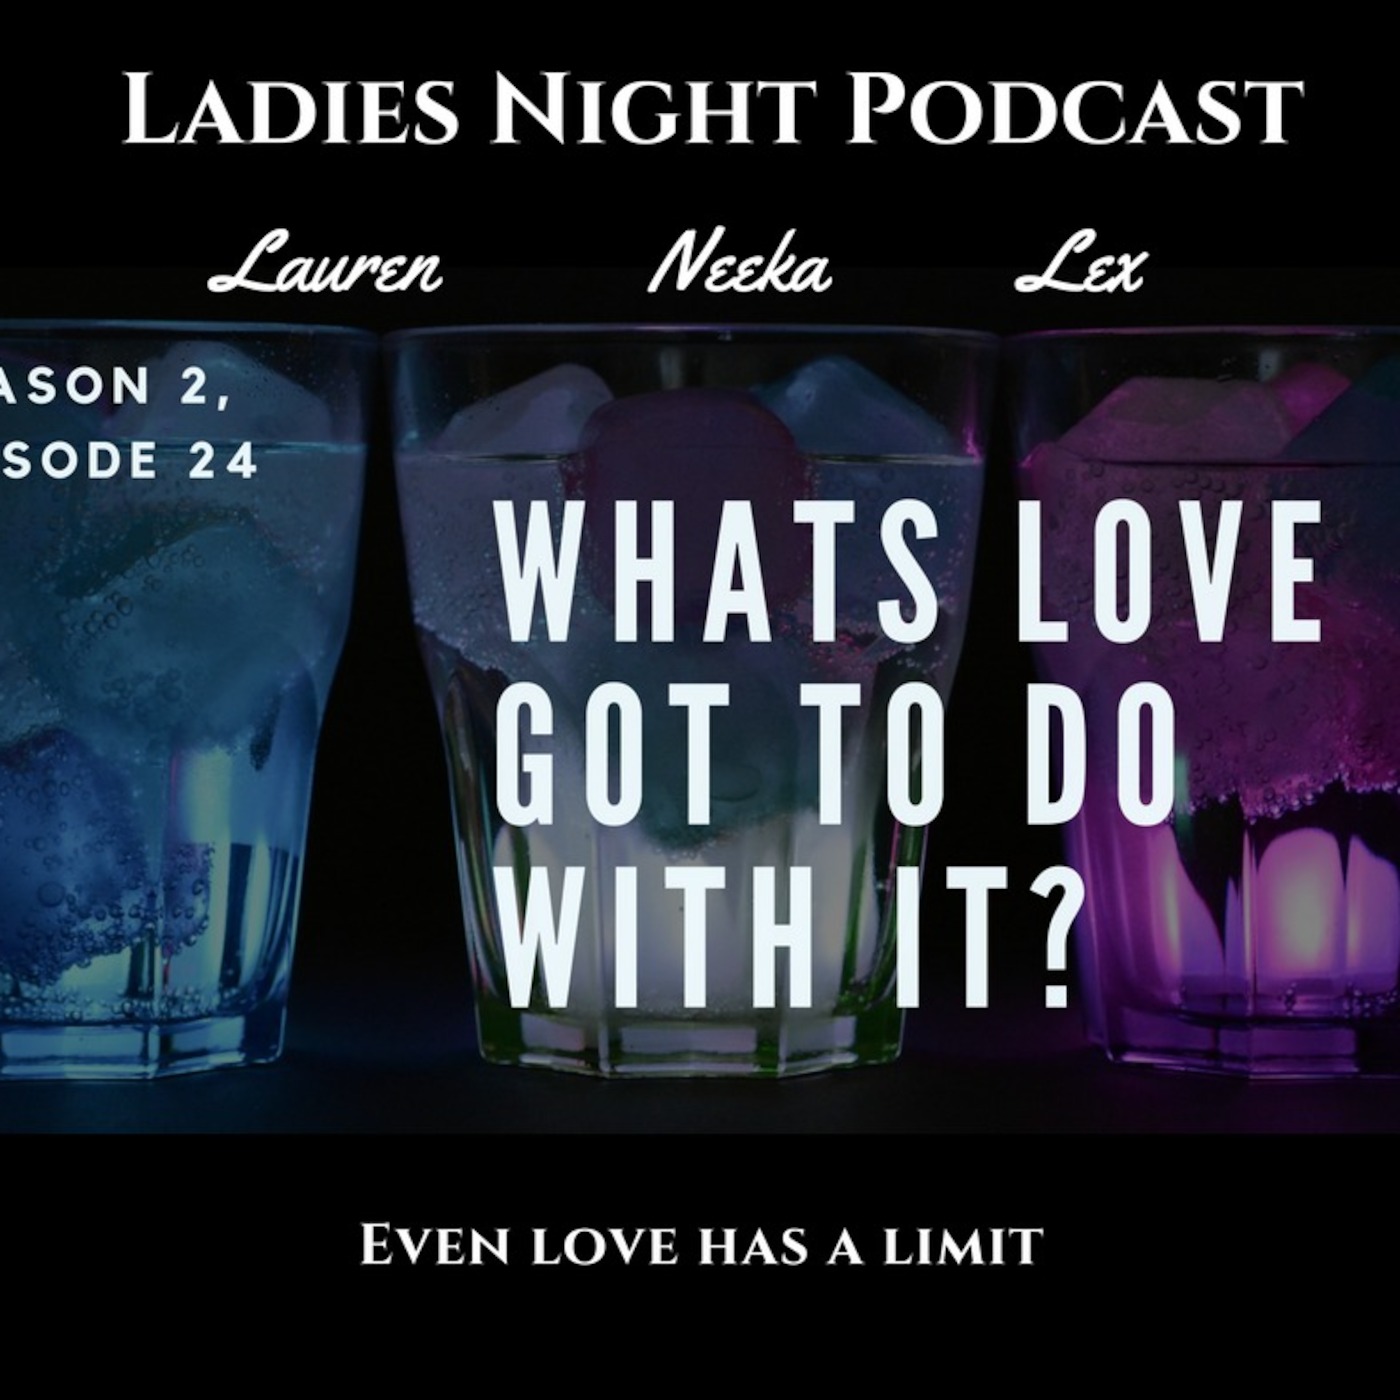 Ladies Night Season 2, Episode 24 - What’s Love Got To Do With It?